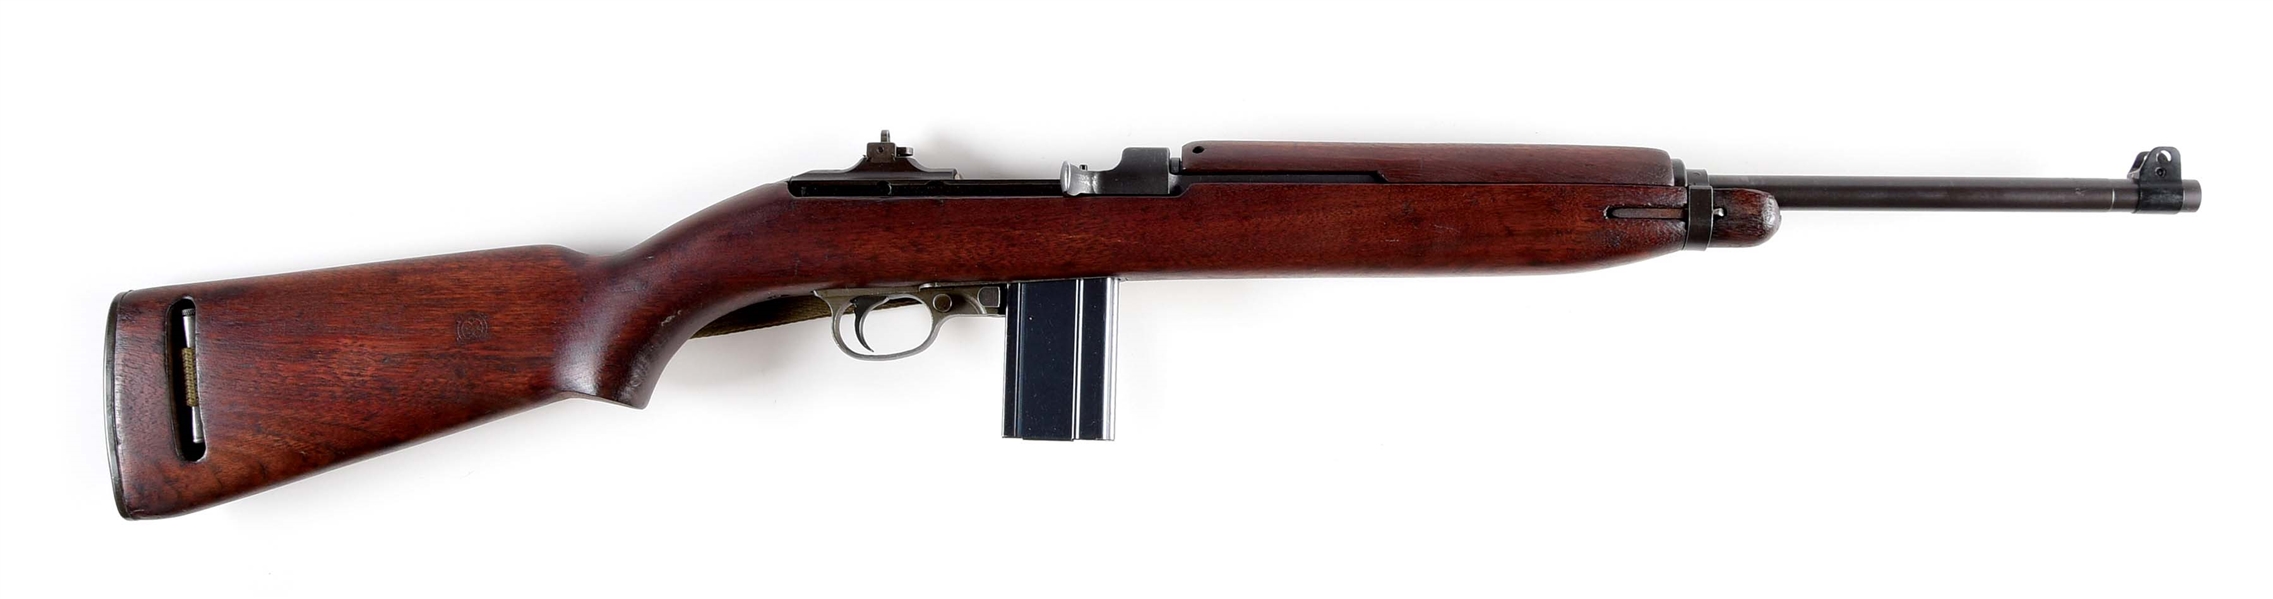 (C) STANDARD PRODUCTS MODEL OF 1943 M1 CARBINE